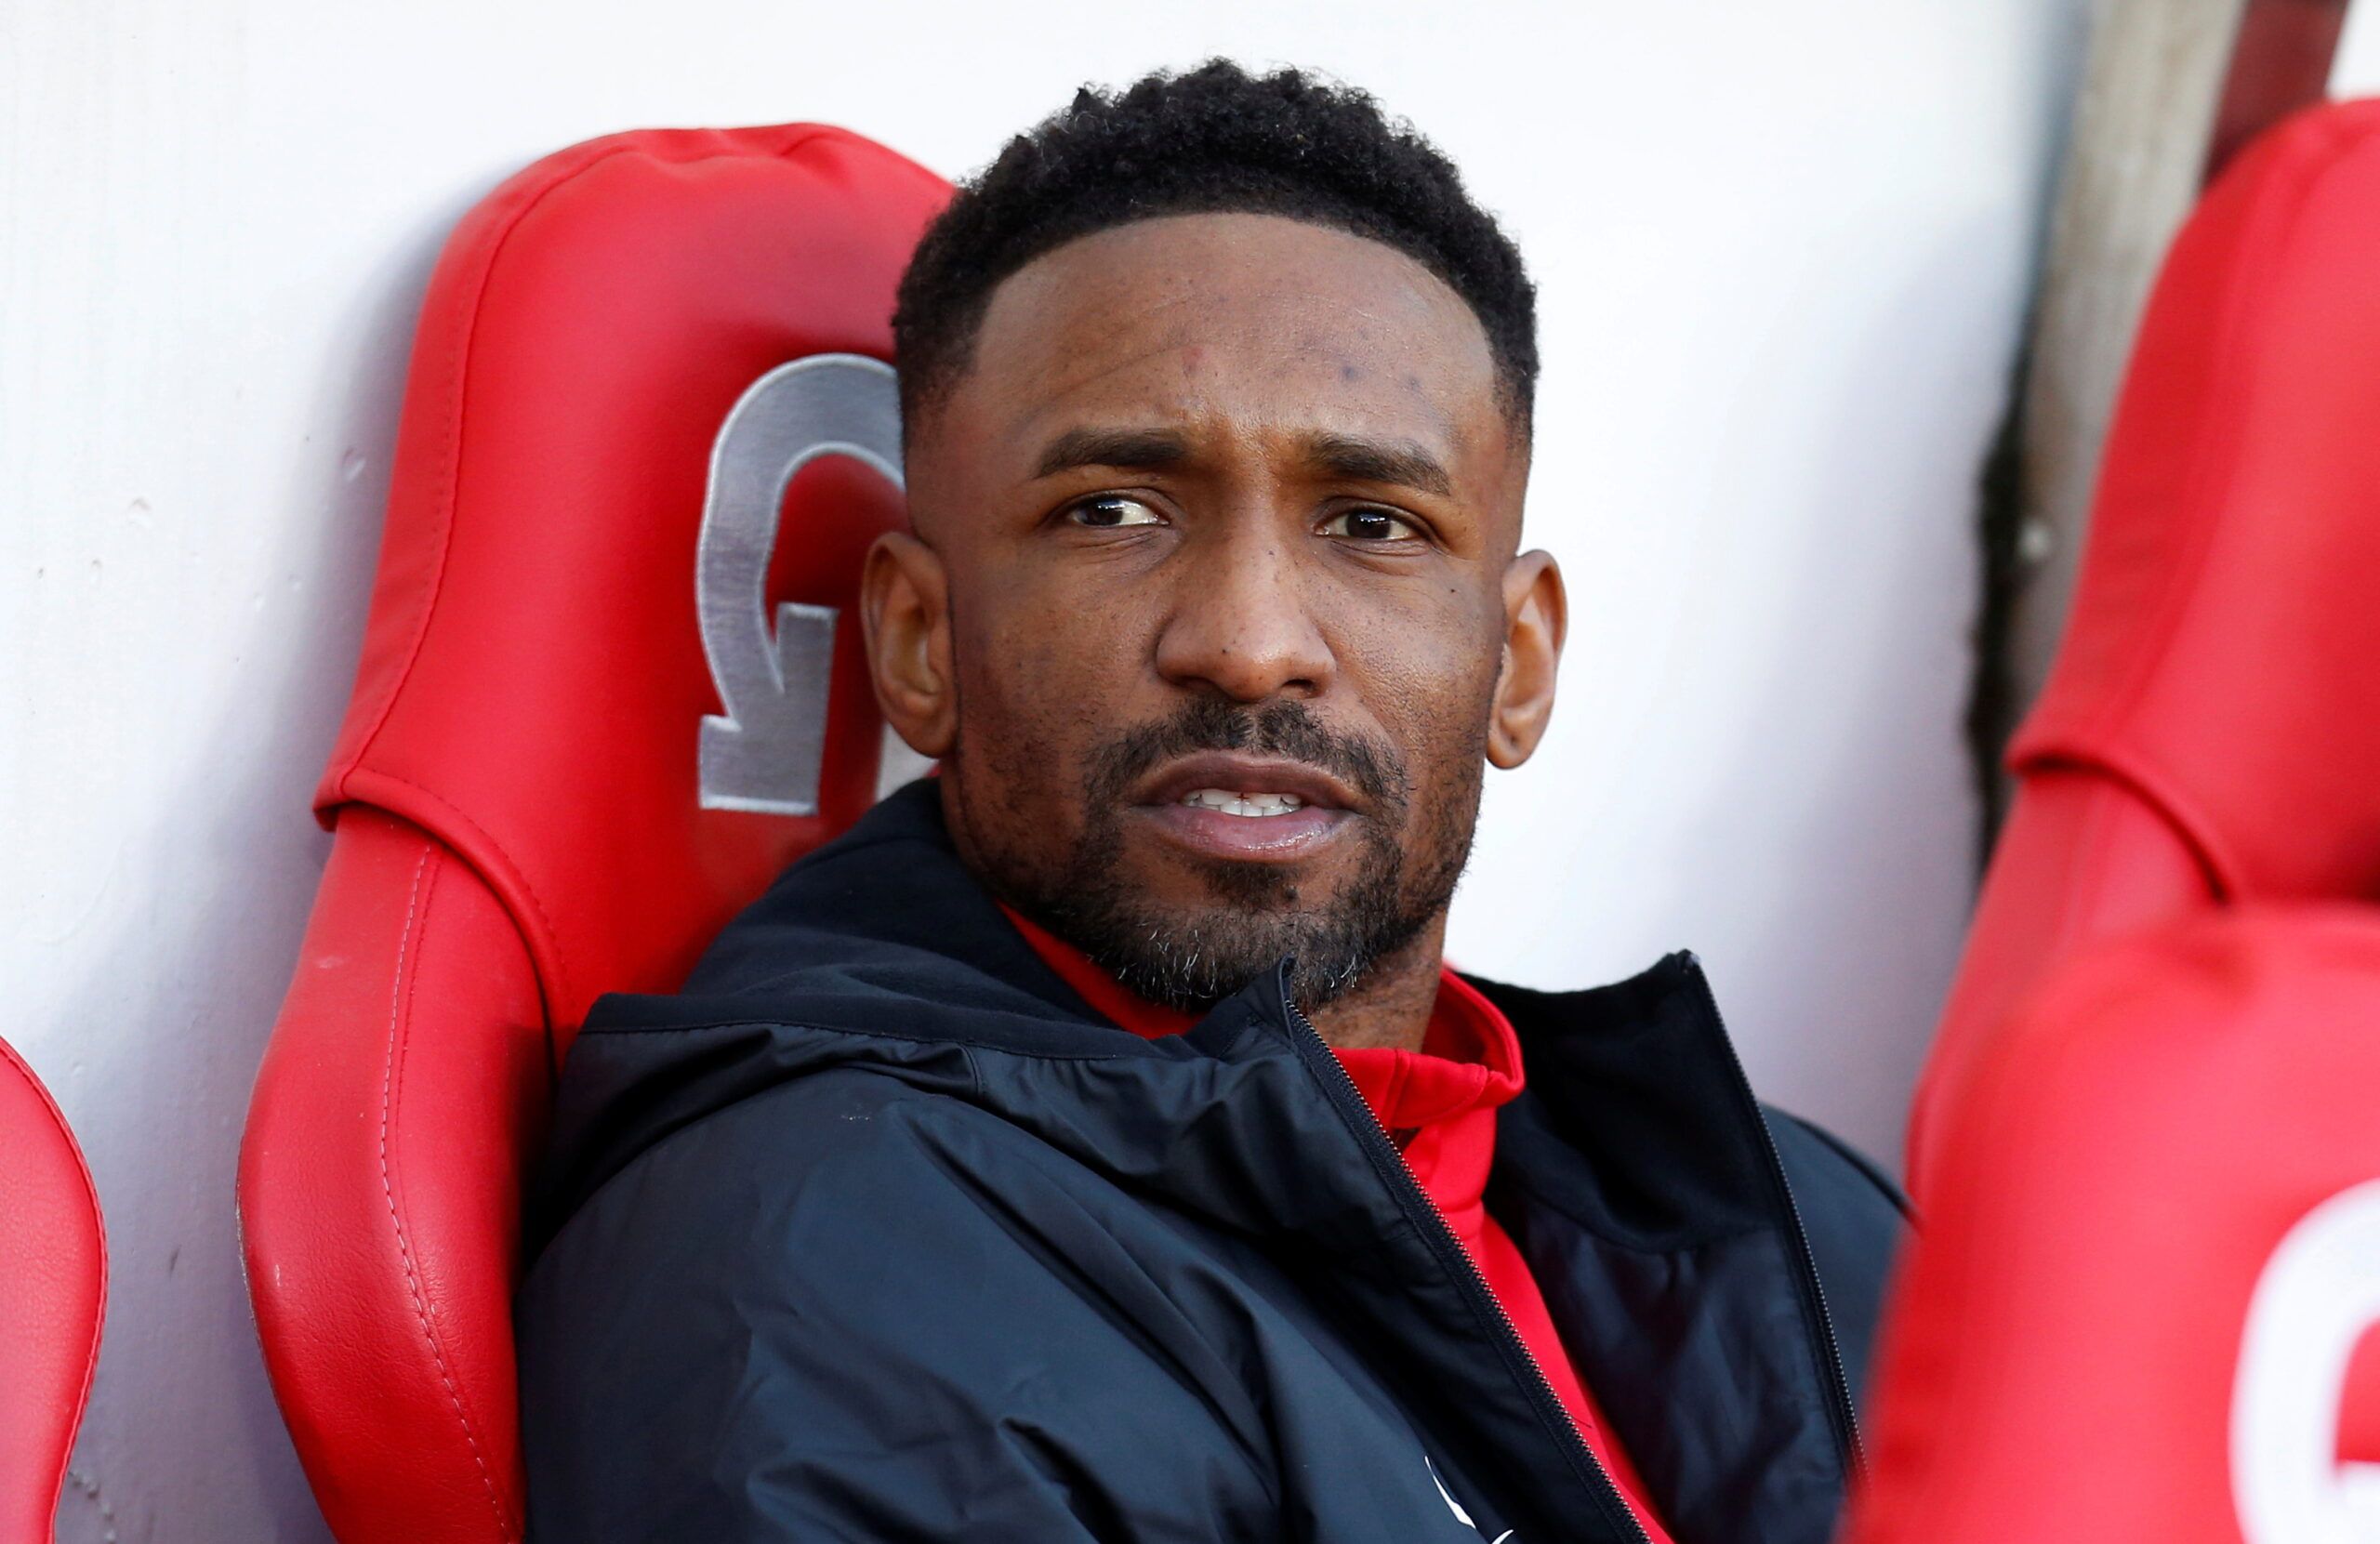 Soccer Football - Sunderland v Milton Keynes Dons - Stadium of Light, Sunderland, Britain - February 19, 2022 Sunderland's Jermain Defoe on the bench  Action Images/Ed Sykes??EDITORIAL USE ONLY. No use with unauthorized audio, video, data, fixture lists, club/league logos or 